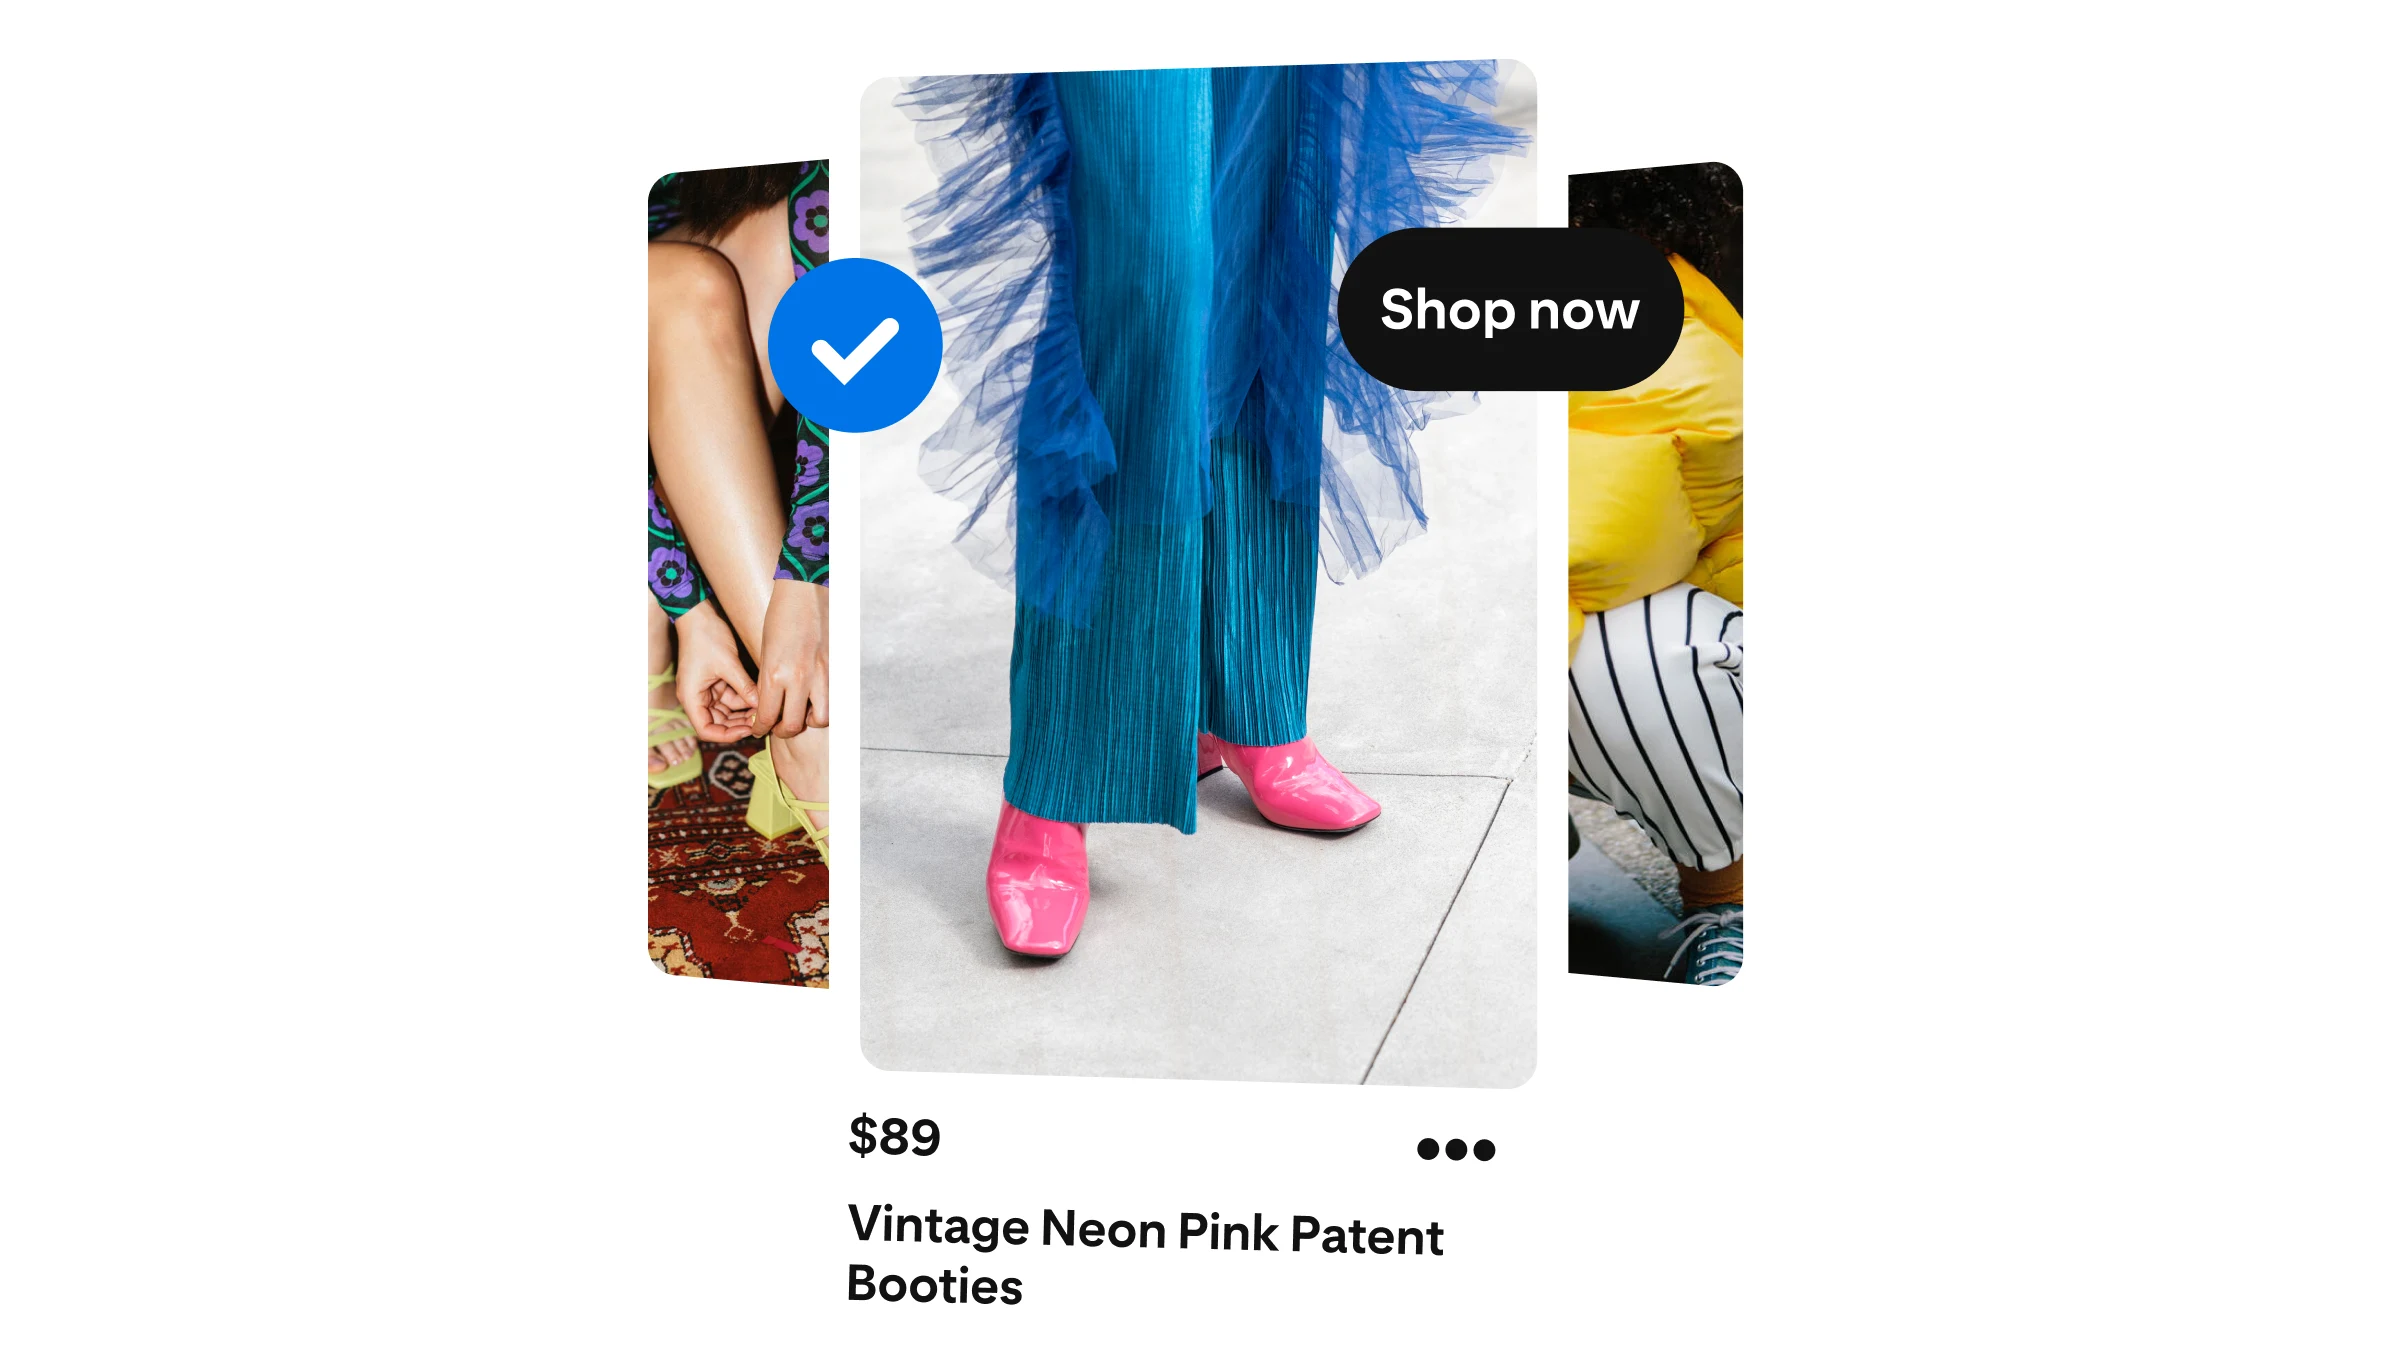 An ad with blue pants and pink shoes encourages people to shop.